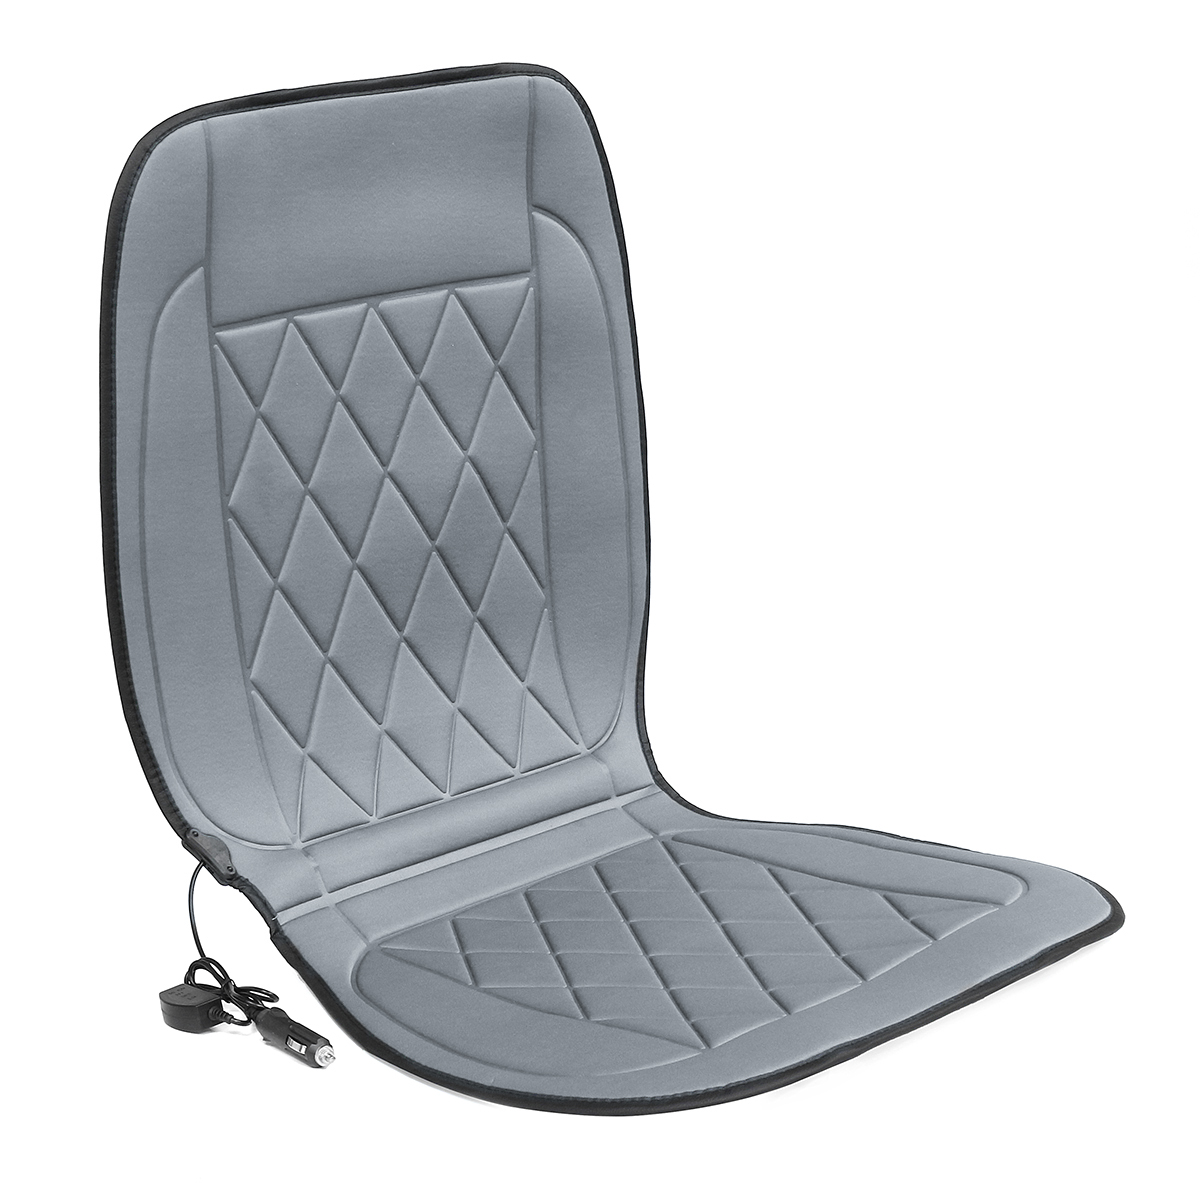 12V-Car-Front-Seat-Heated-Cushion-Winter-Warmer-Cover-Heating-Mat-Universal-1404765